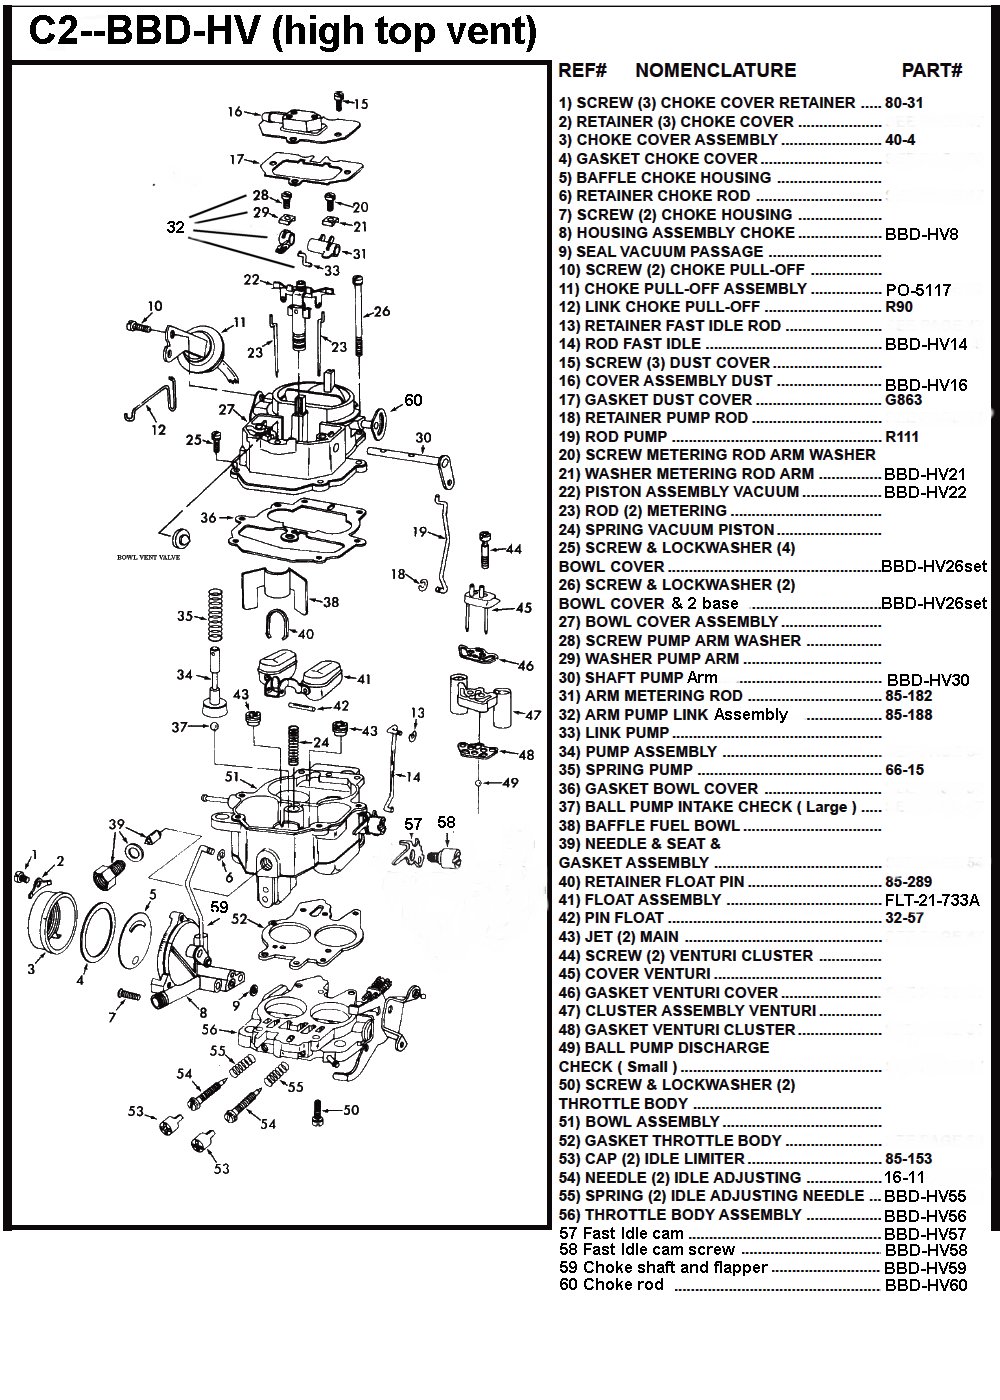 Carter C2 BBD Parts Page